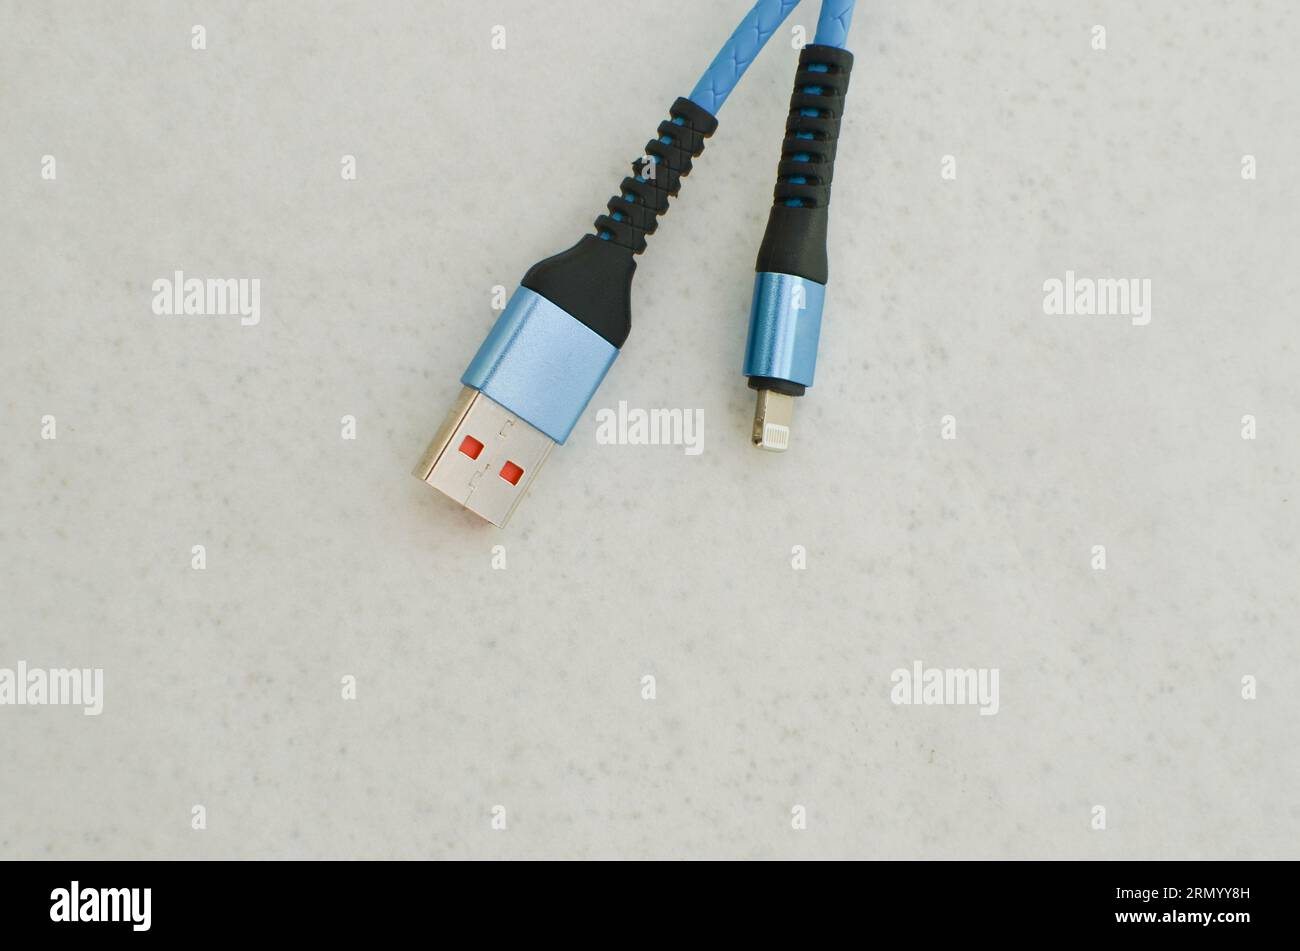 Apple USB cable connection detail highlighted on a light surface, perfect for modern technology concepts. Cable that provides speed and data transfer. Stock Photo